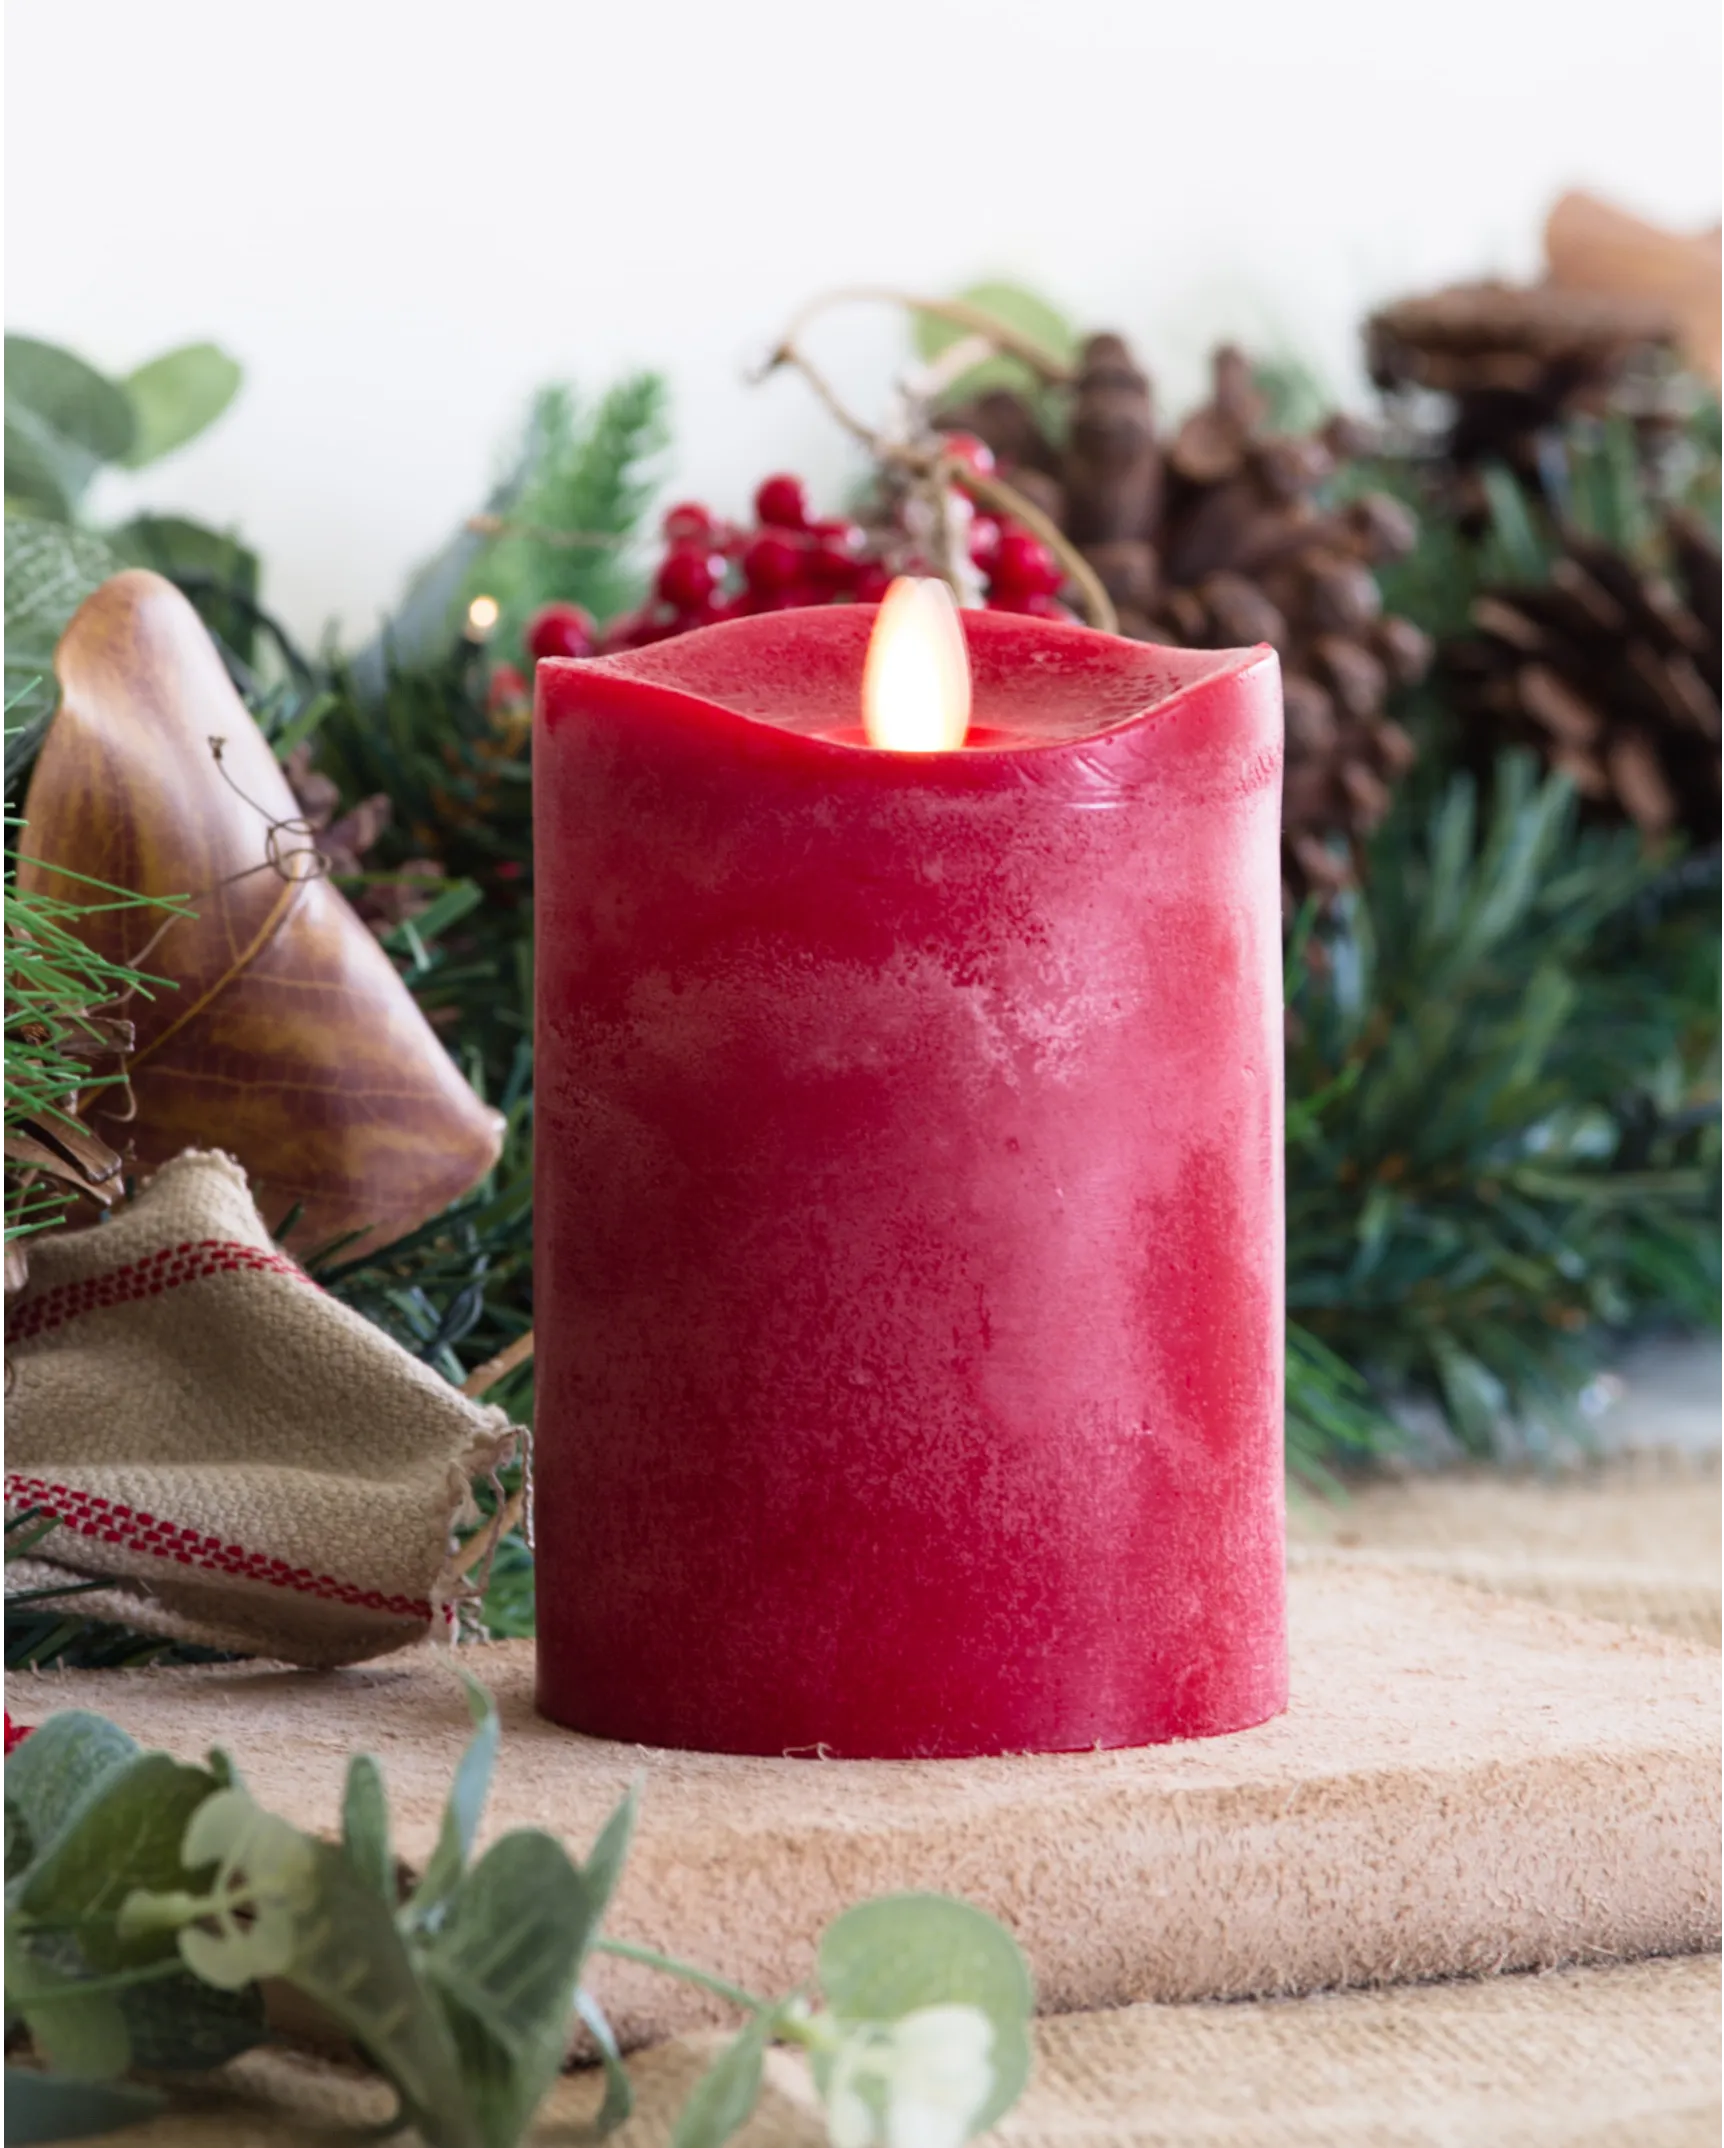 https://source.widen.net/content/xdxzv8jny6/webp/CDL-1741012_5in-Miracle-Flame-LED-Wax-Red-Christmas-Candle_SSC-10.webp?position=c&color=ffffffff&quality=80&u=7mzq6p&w=862&h=1074&retina=true